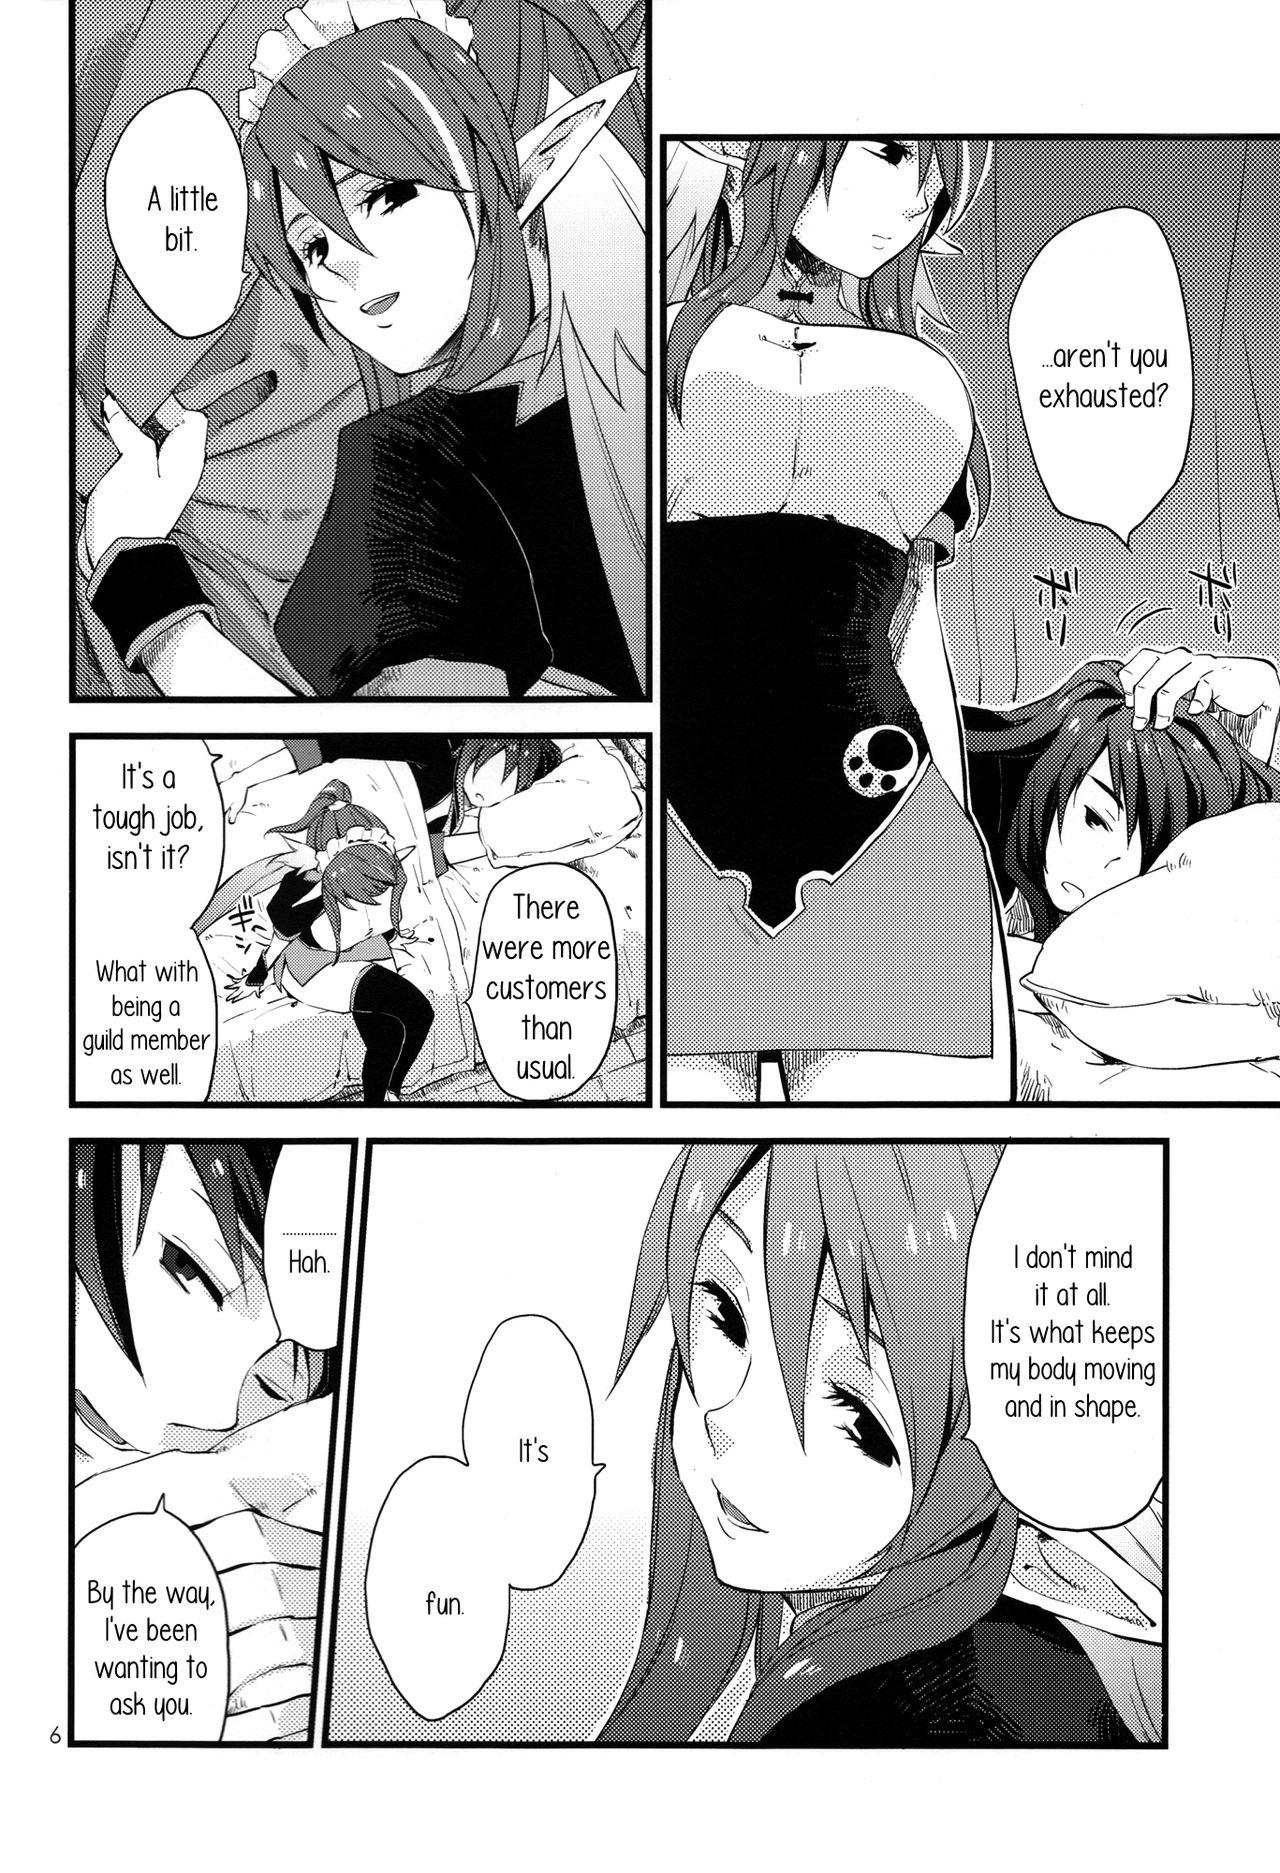 Belly MILK GIRL - Tales of vesperia Private Sex - Page 5